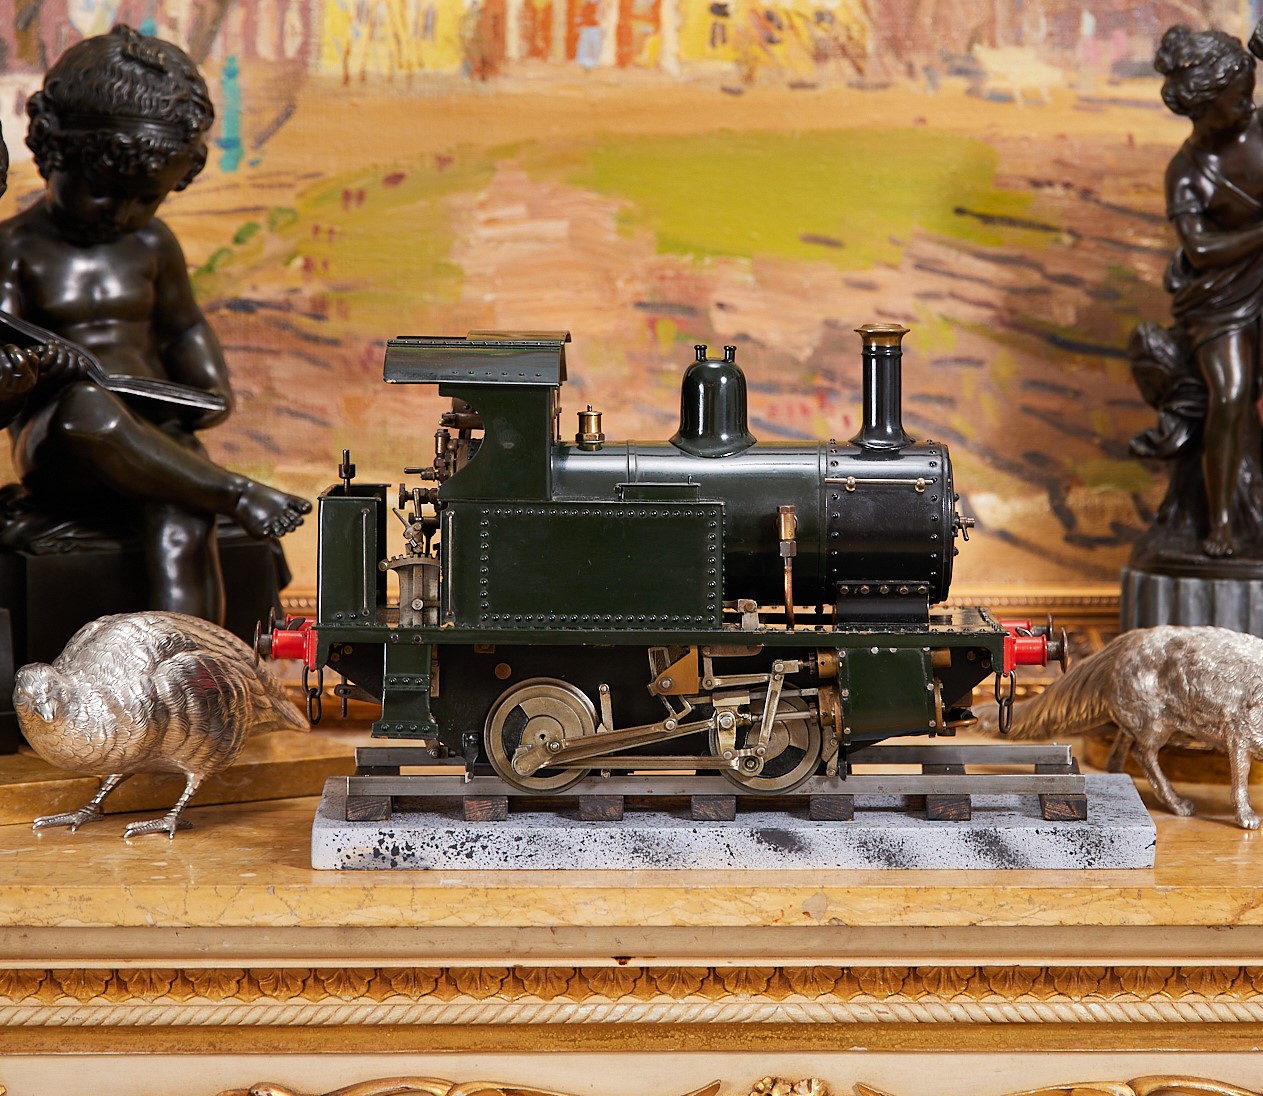 A FULL WORKING MODEL OF A STEAM TRAIN - Image 31 of 45